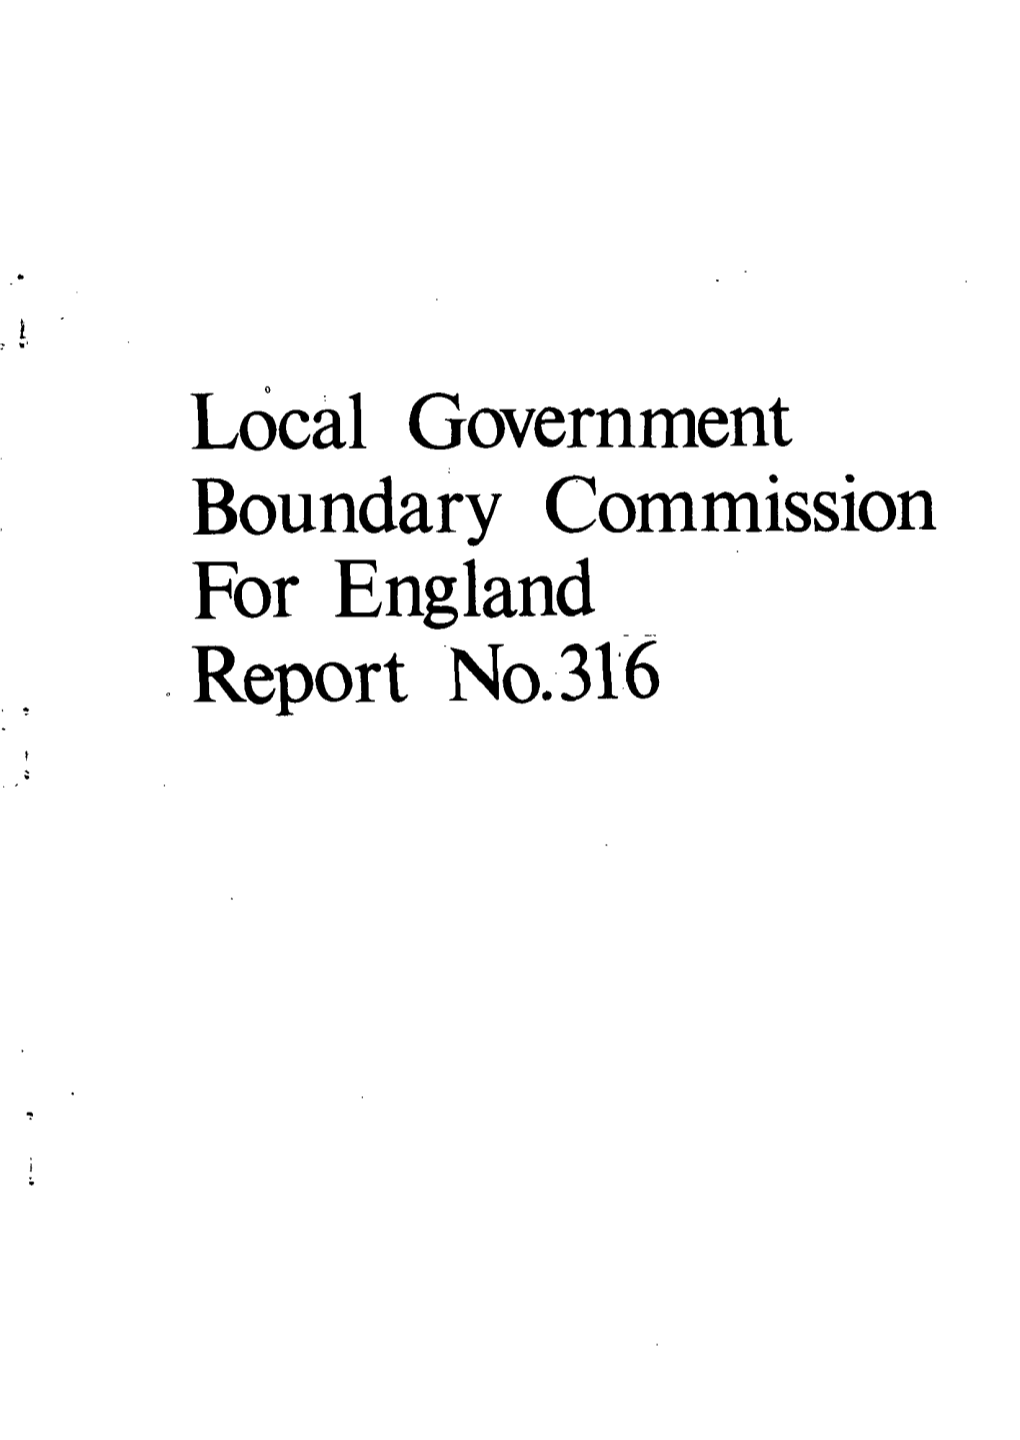 Local Government Boundary Commission for England Report No.316 LOCAL Govdrniikkt